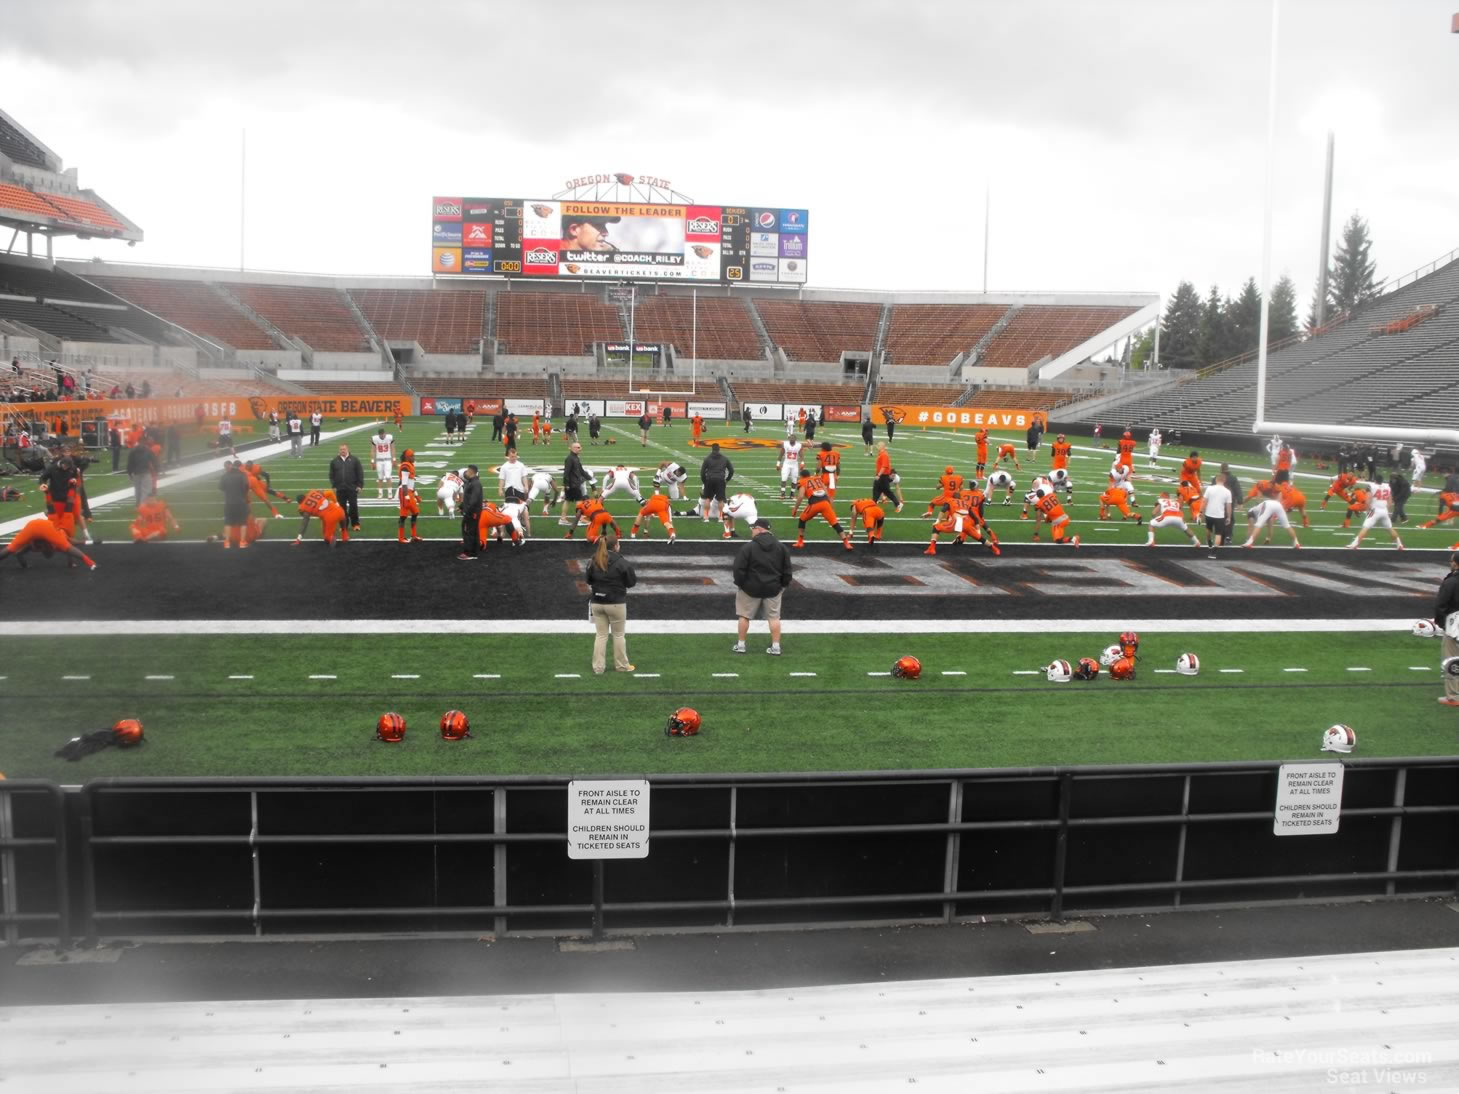 section 22, row 10 seat view  - reser stadium